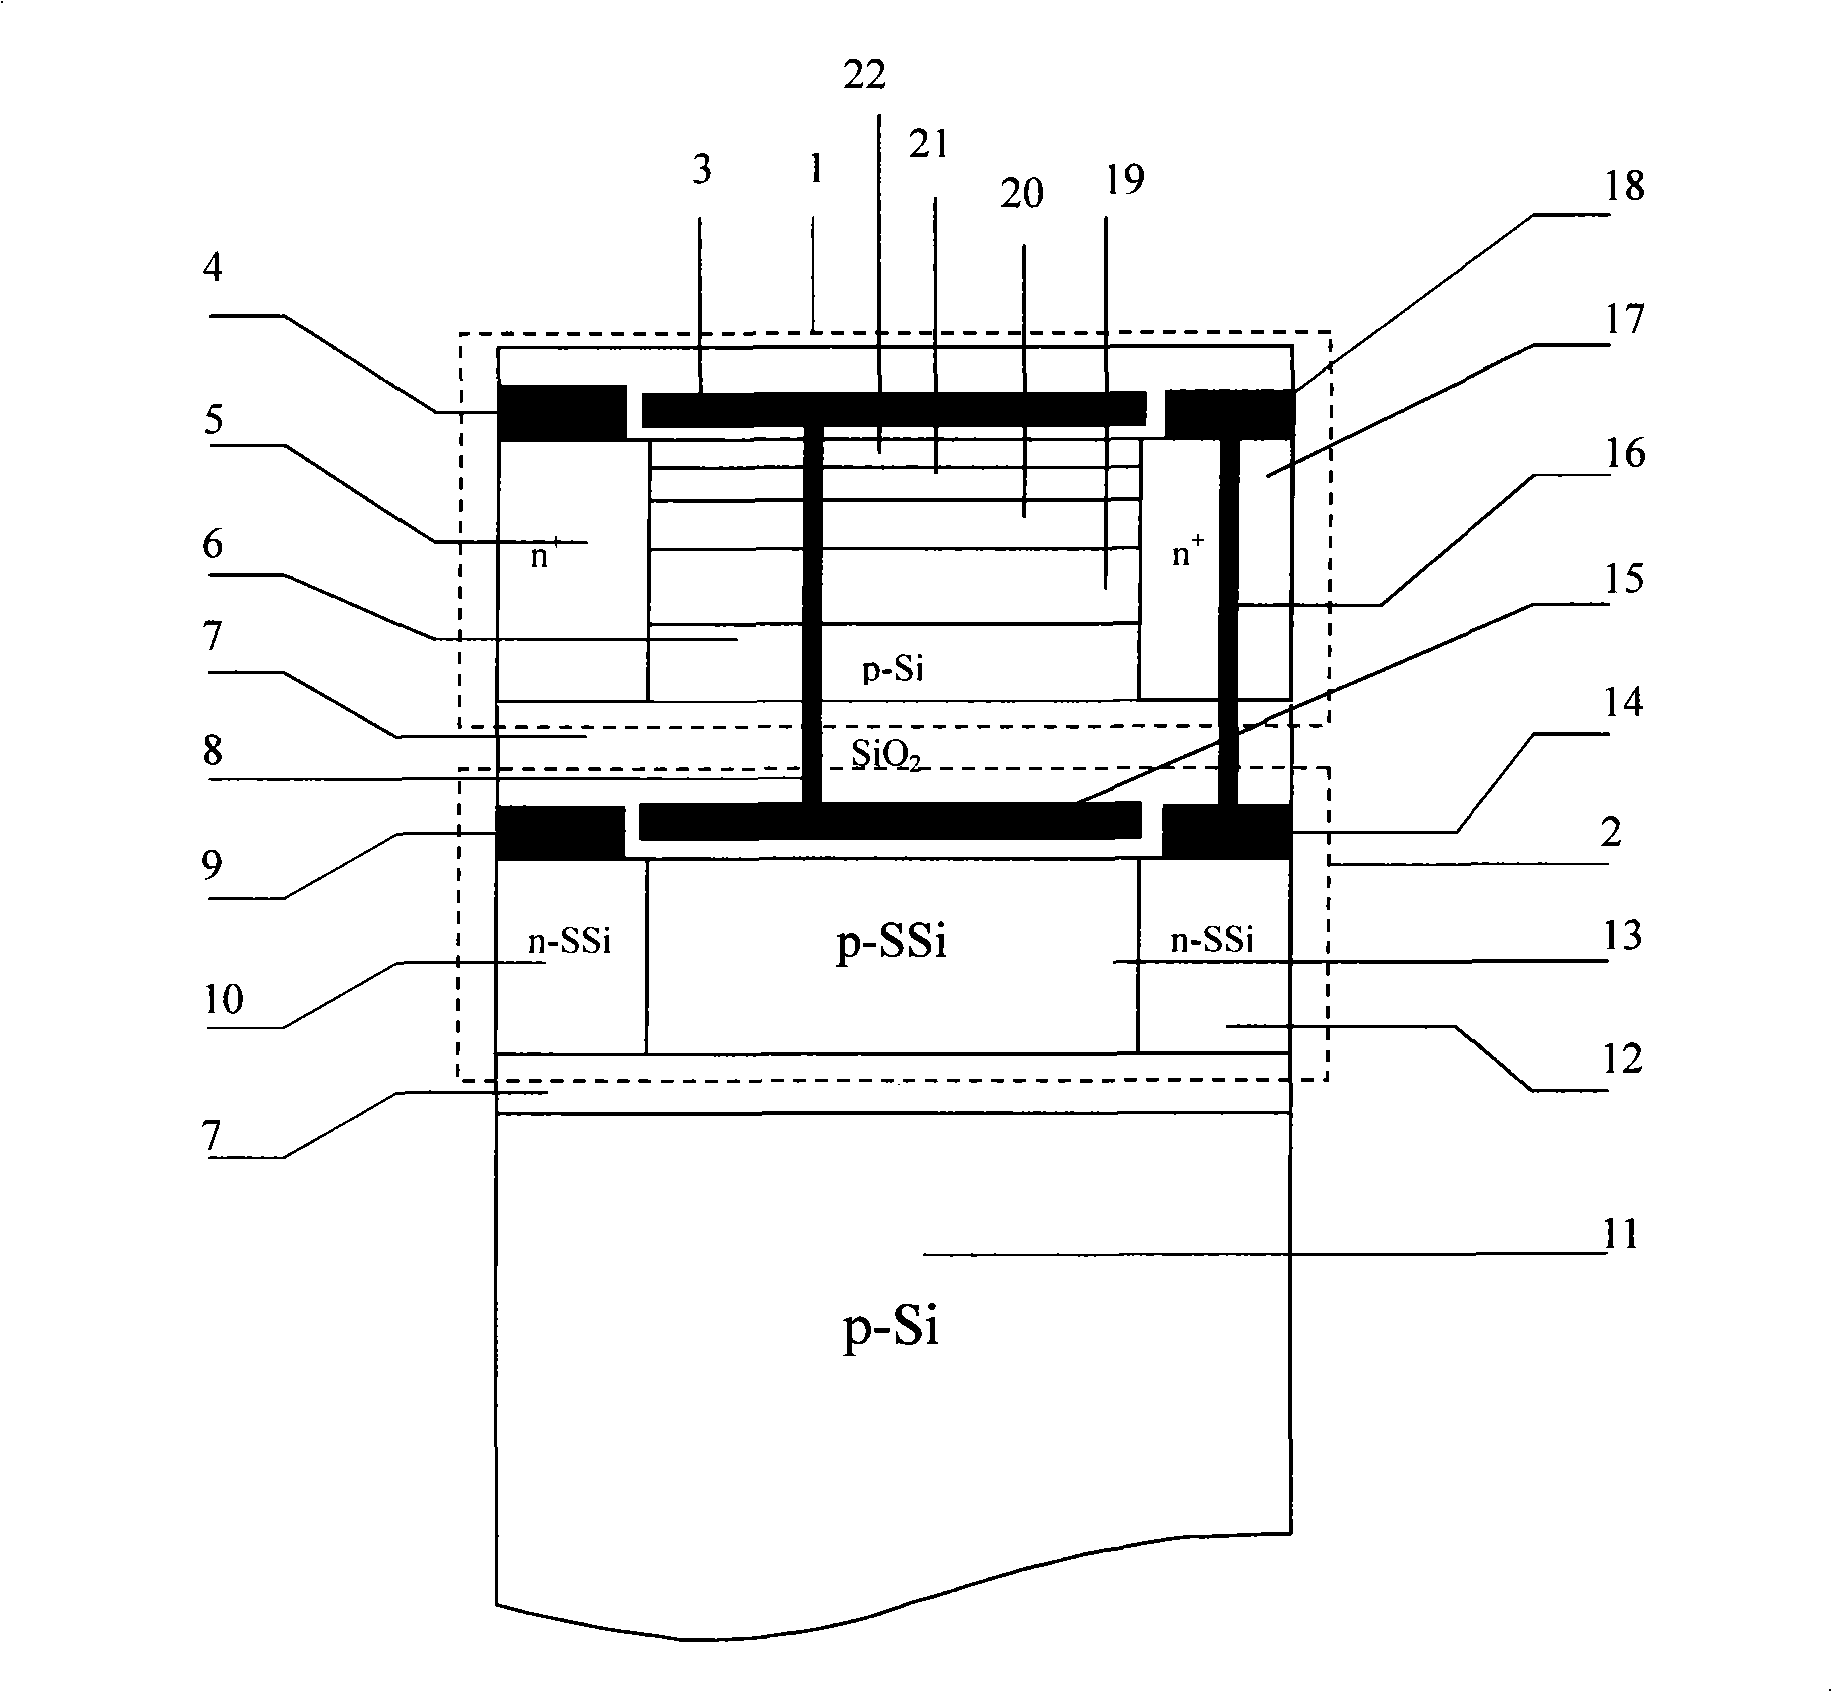 Three-dimensional quantum well NMOS integrated component and preparation method thereof